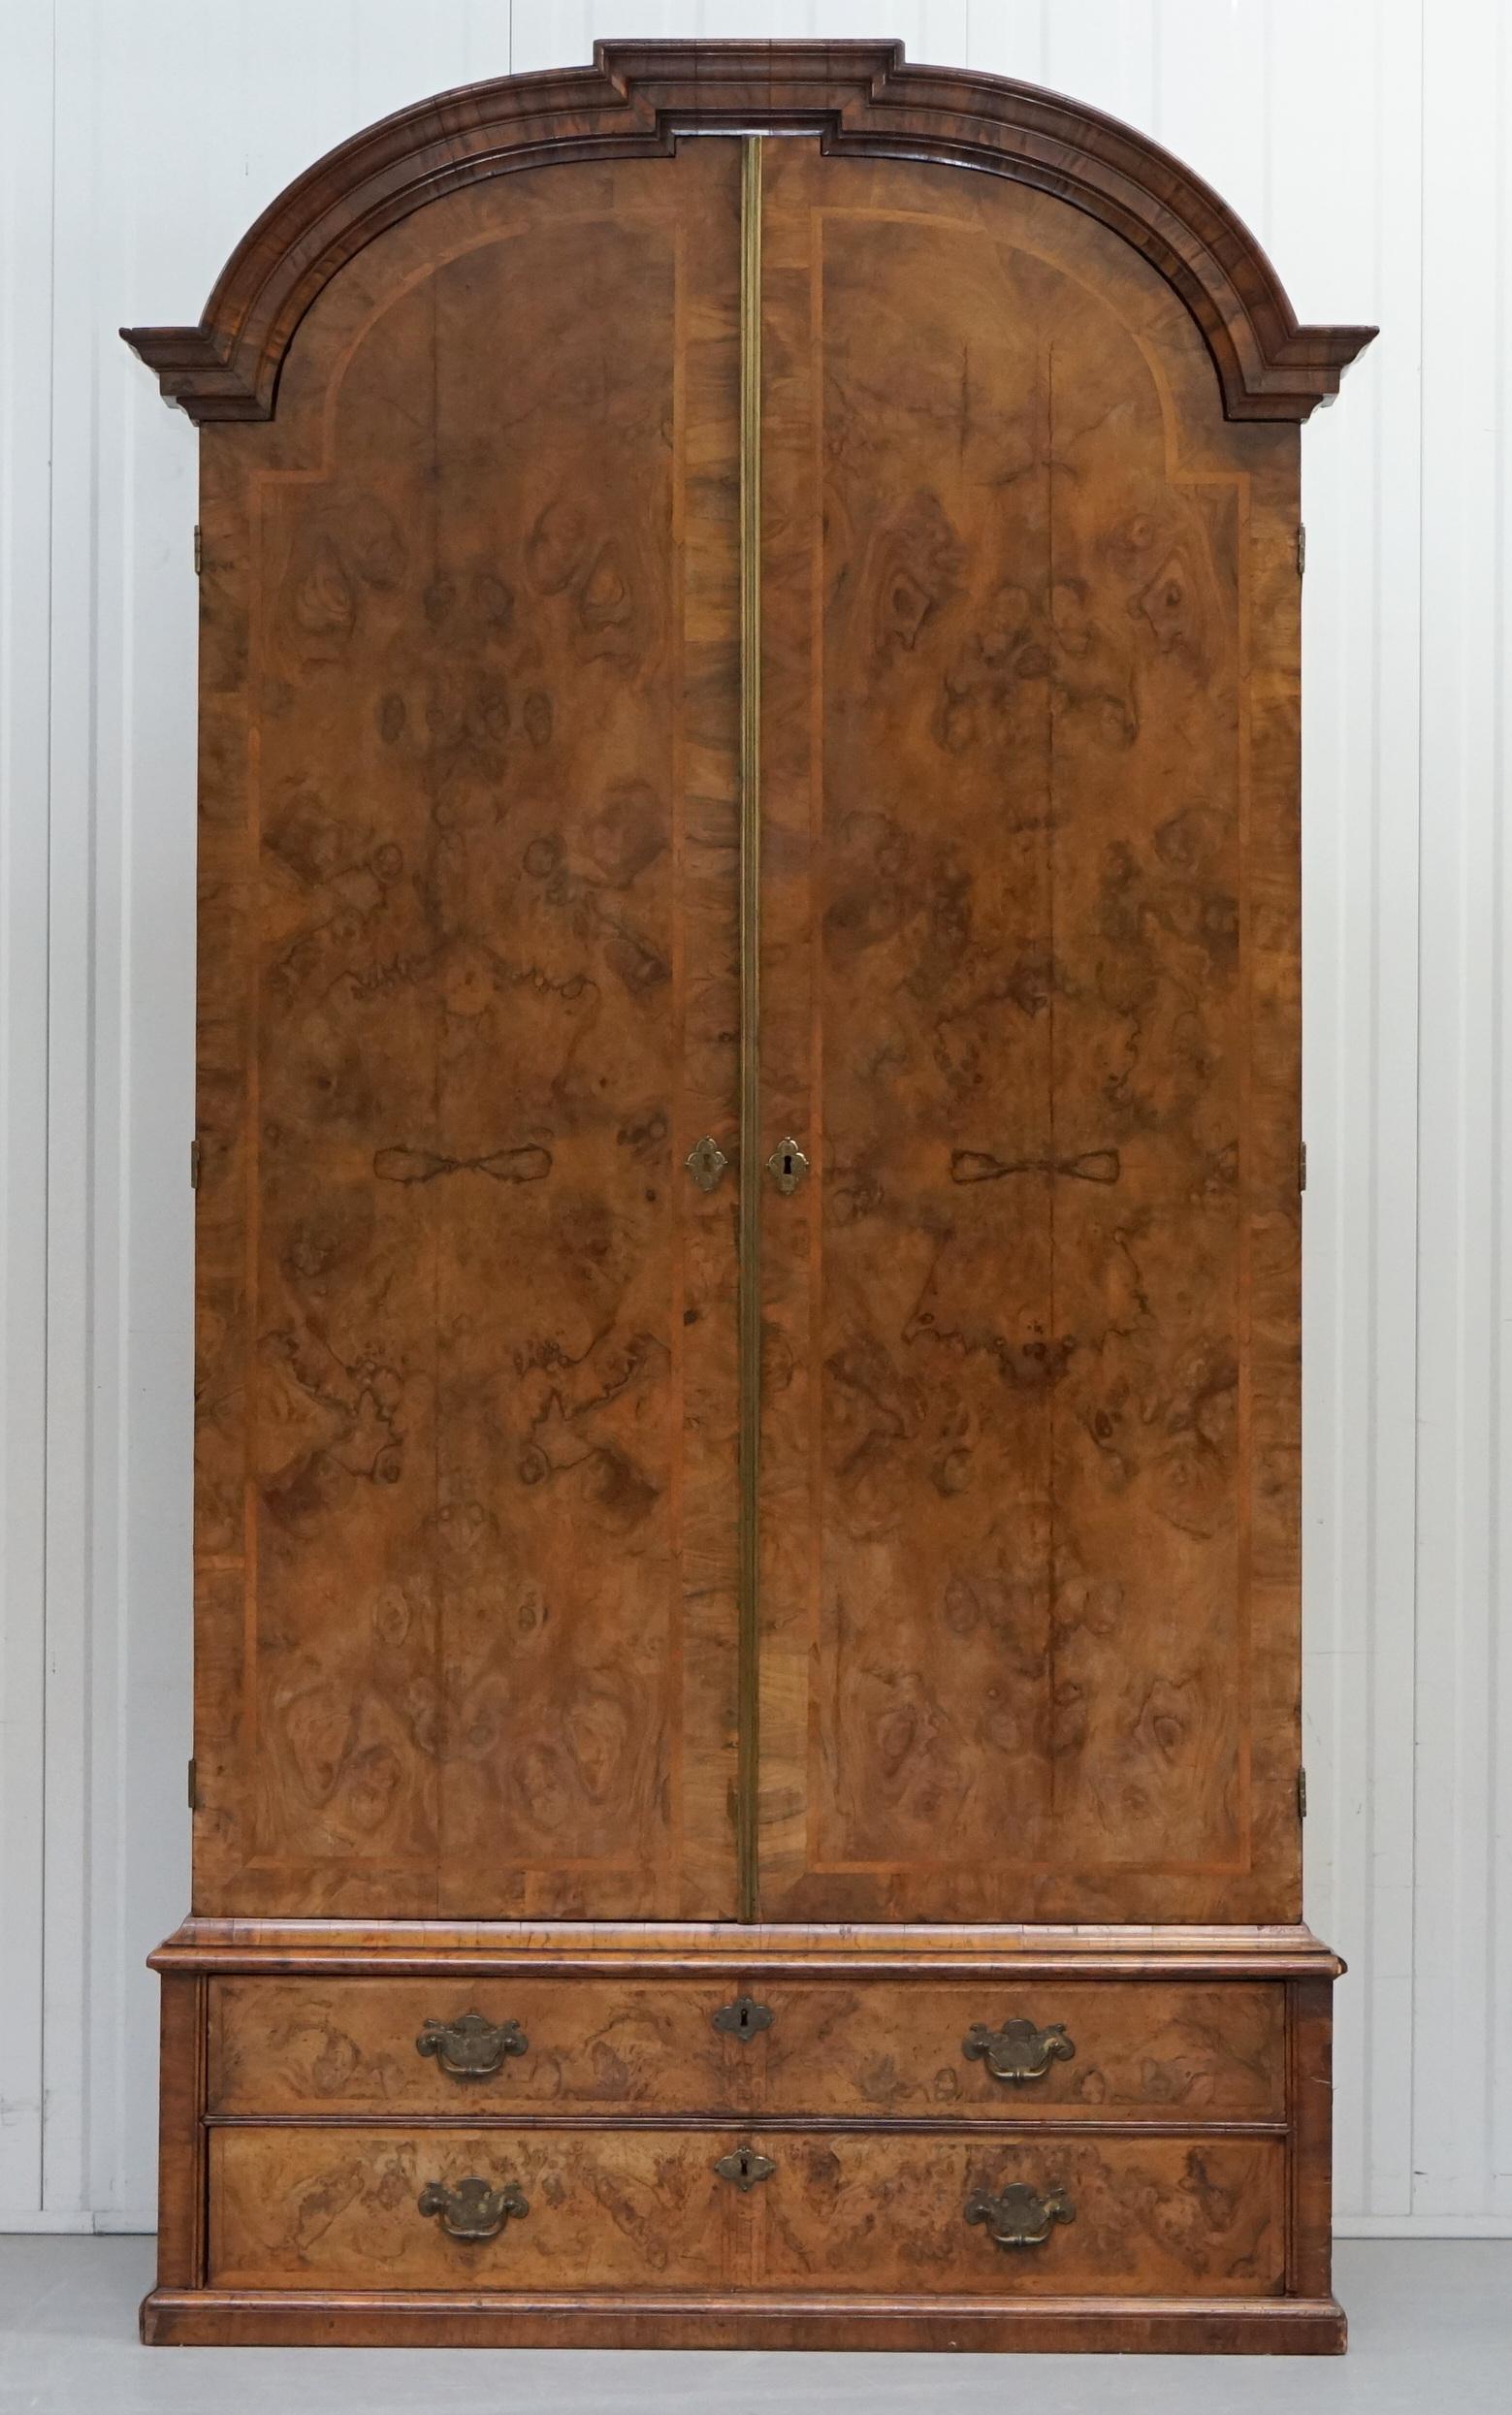 Wimbledon-Furniture is delighted to offer for sale this rare circa 1920’s Art Décor burr quarter cut walnut wardrobe

Please note the delivery fee listed is just a guide, it covers within the M25 only, for an accurate quote please send me your